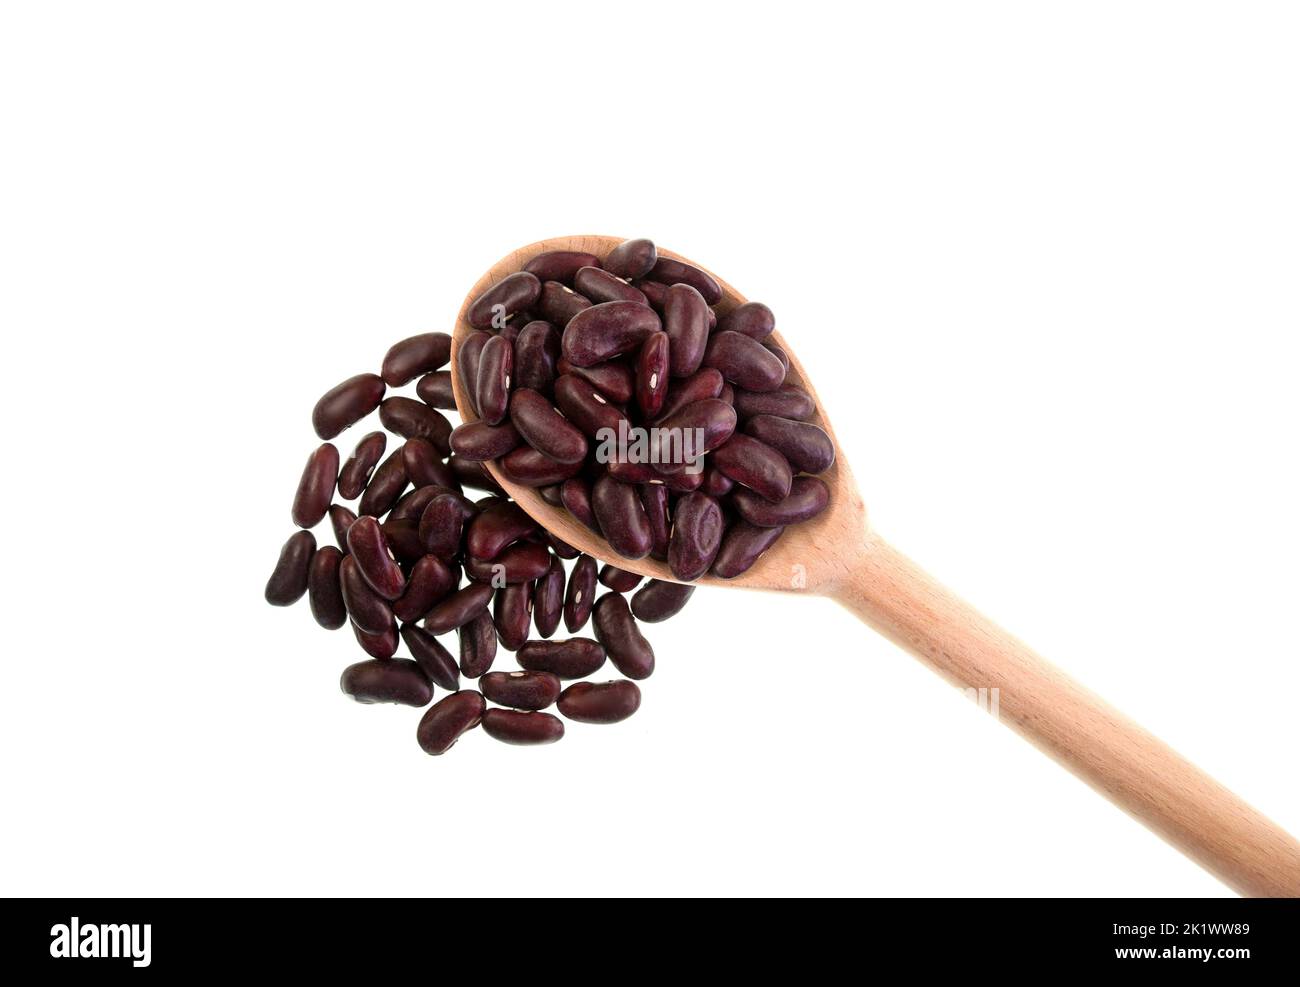 Pulses are edible seeds of leguminous plants such as peas, beans, lentils, etc. Dark red kidney beans, Phaseolus vulgaris, on the image. Stock Photo